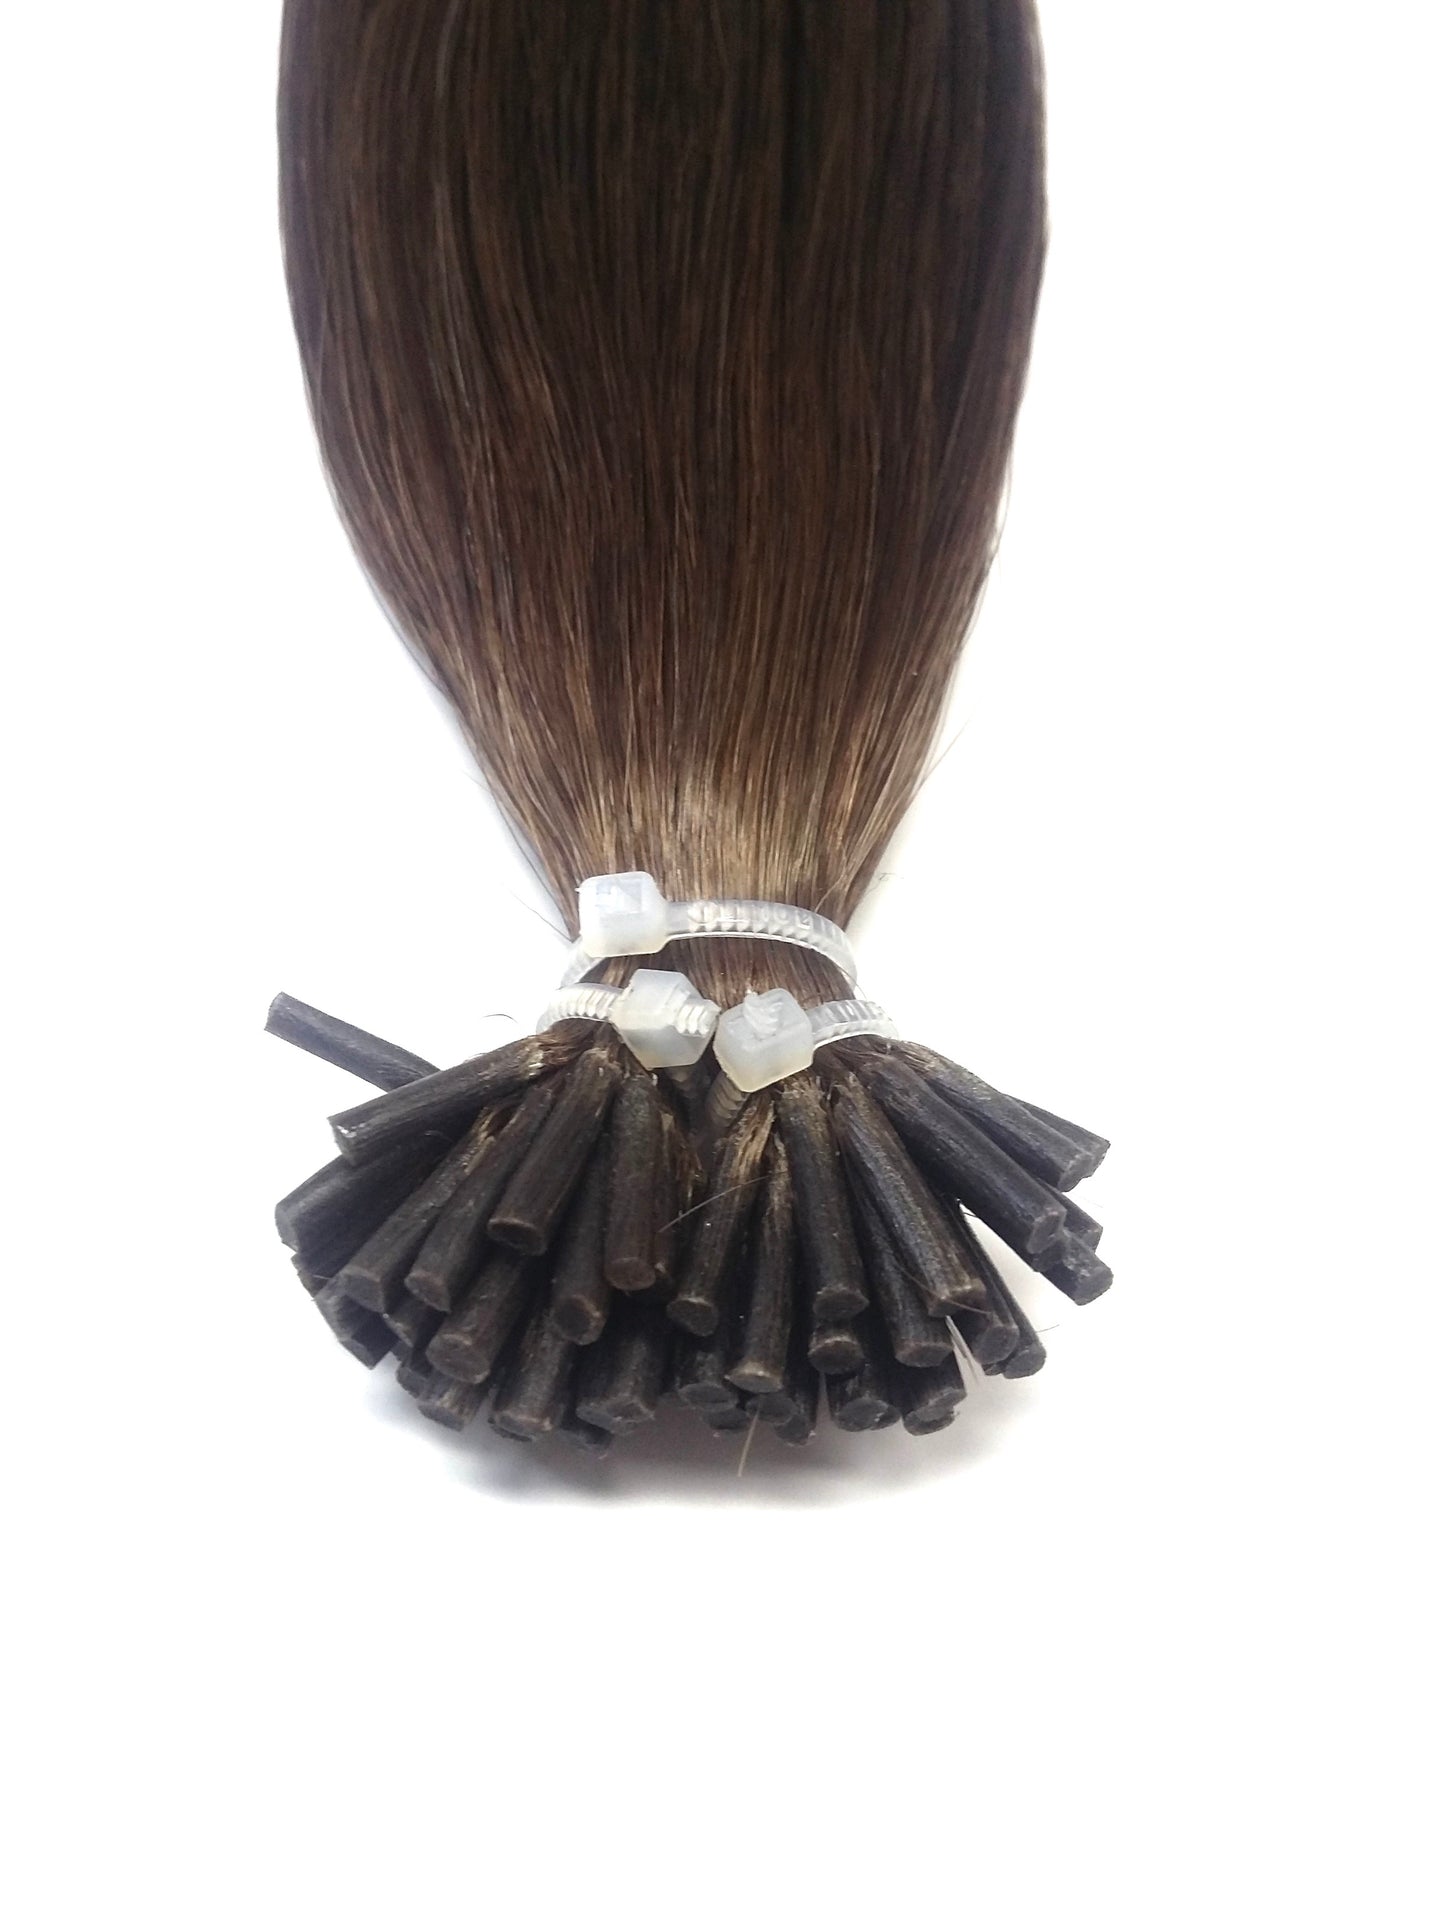 Russian Remy Human Hair, 1g itips, Straight, 20'', Colour 4, 50g, Quick Shipping!